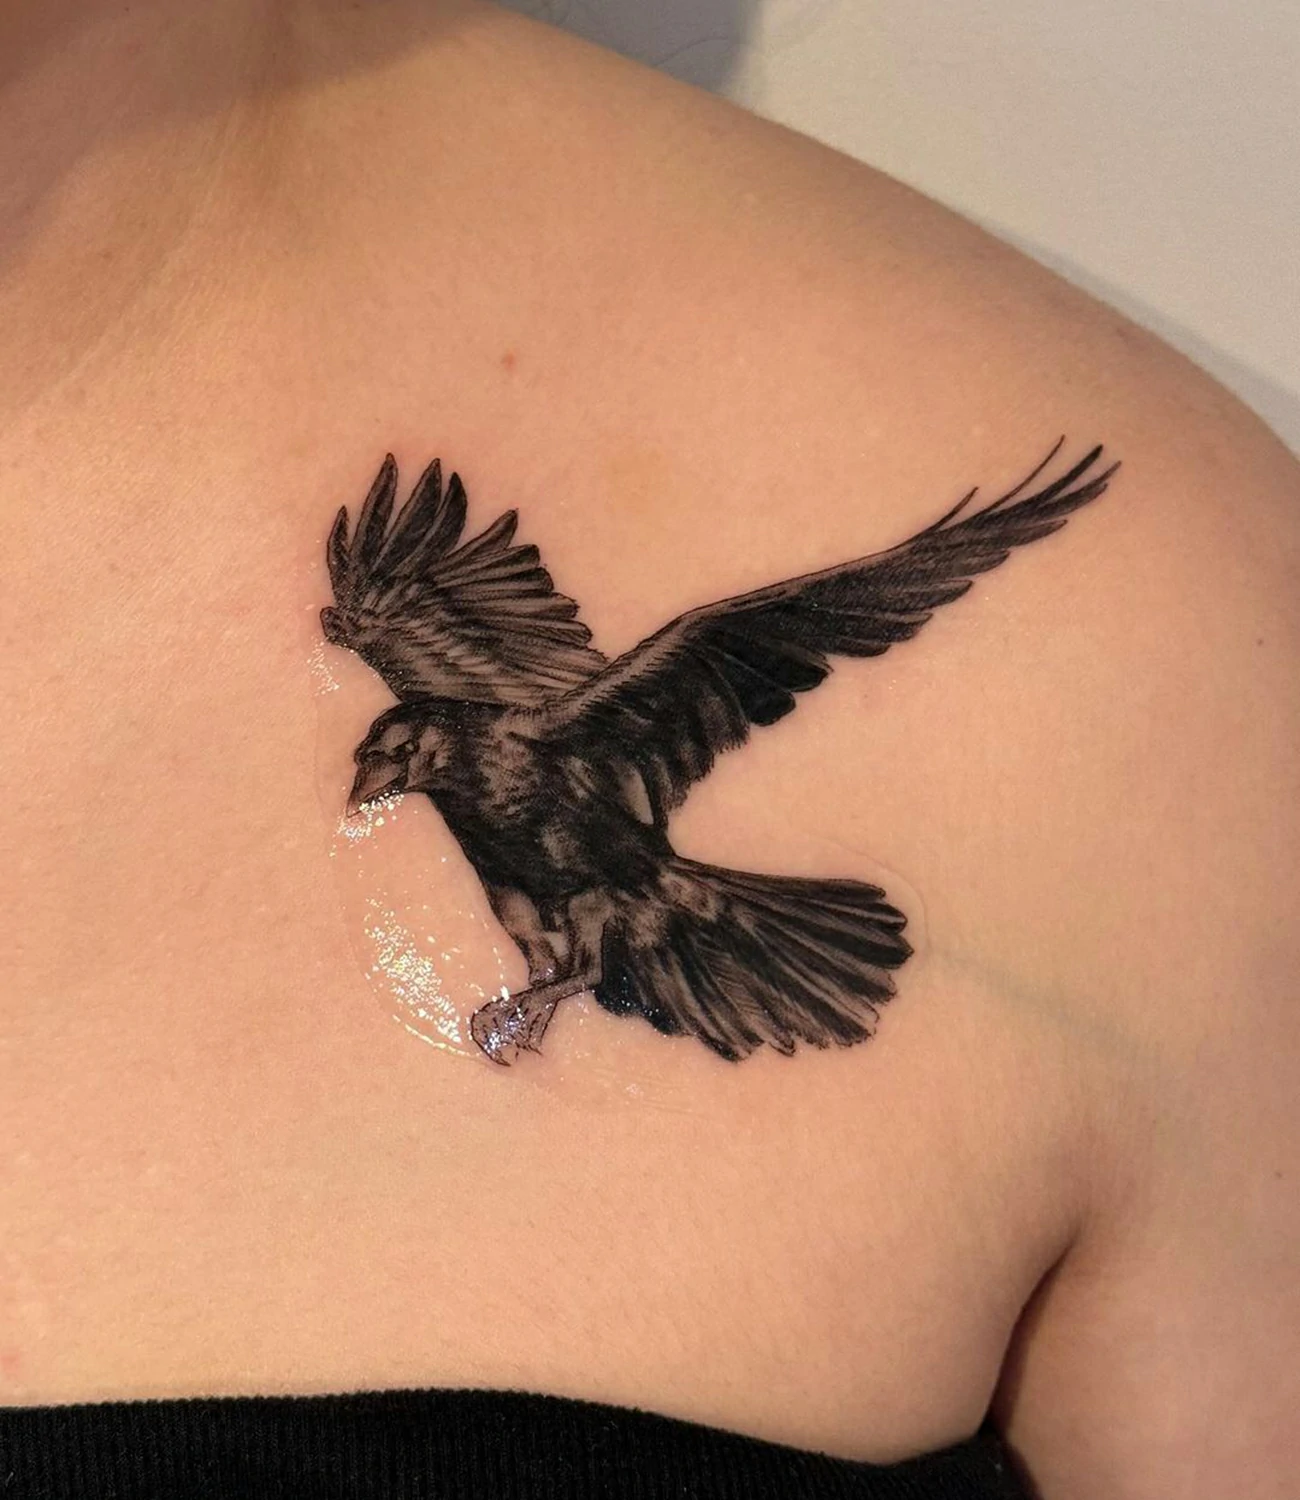 Tiny raven tattoo: A small, delicate raven tattoo for subtle ink lovers.